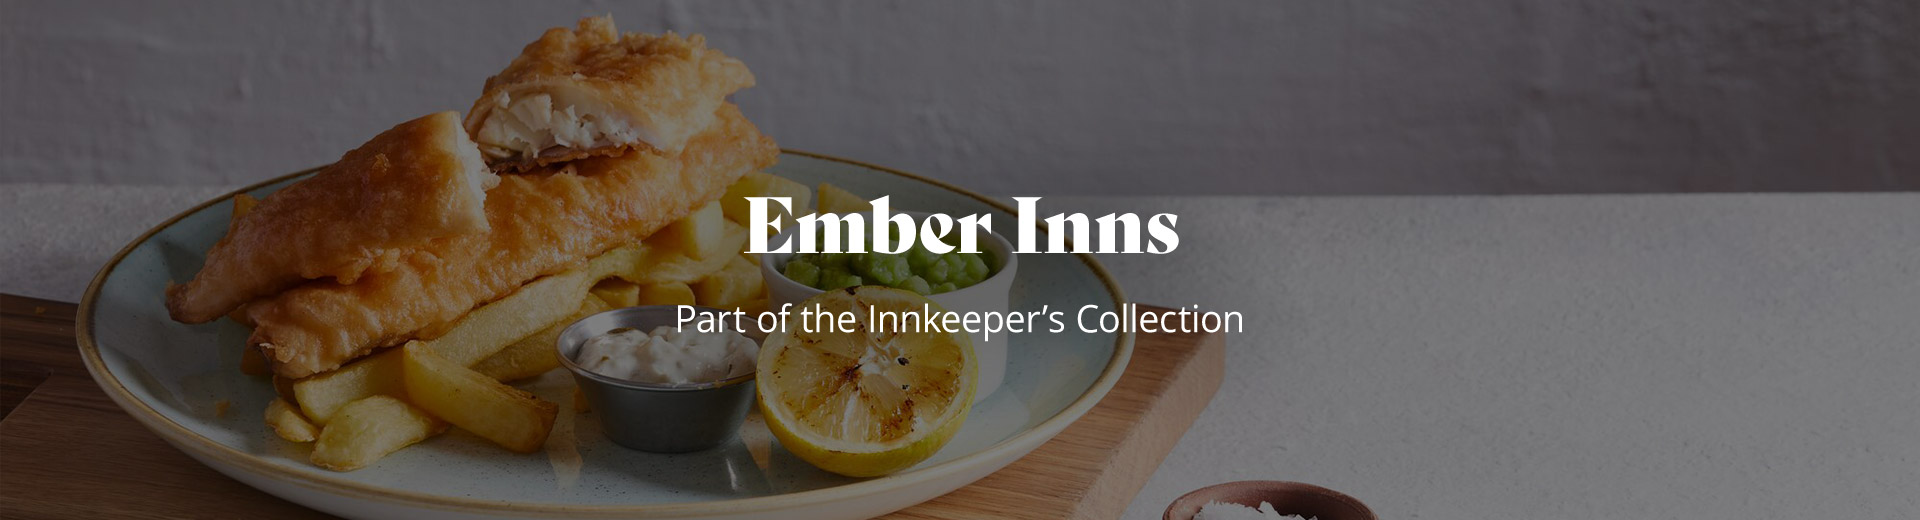 Food and Drink at Ember Inns